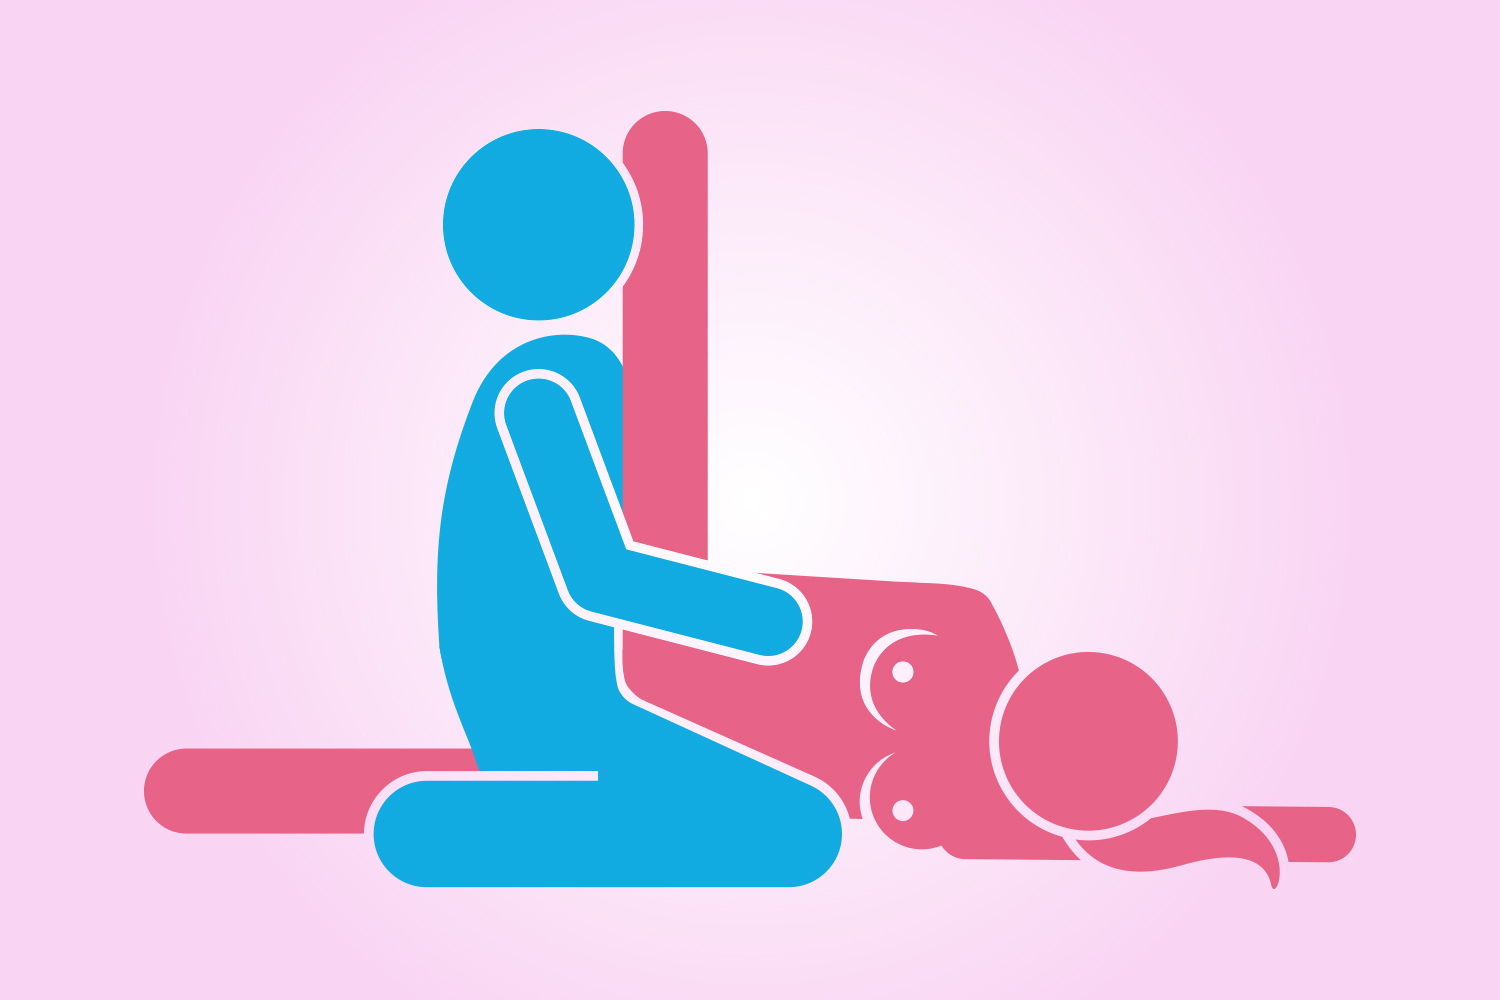 achin mehta add photo sex positions for large women